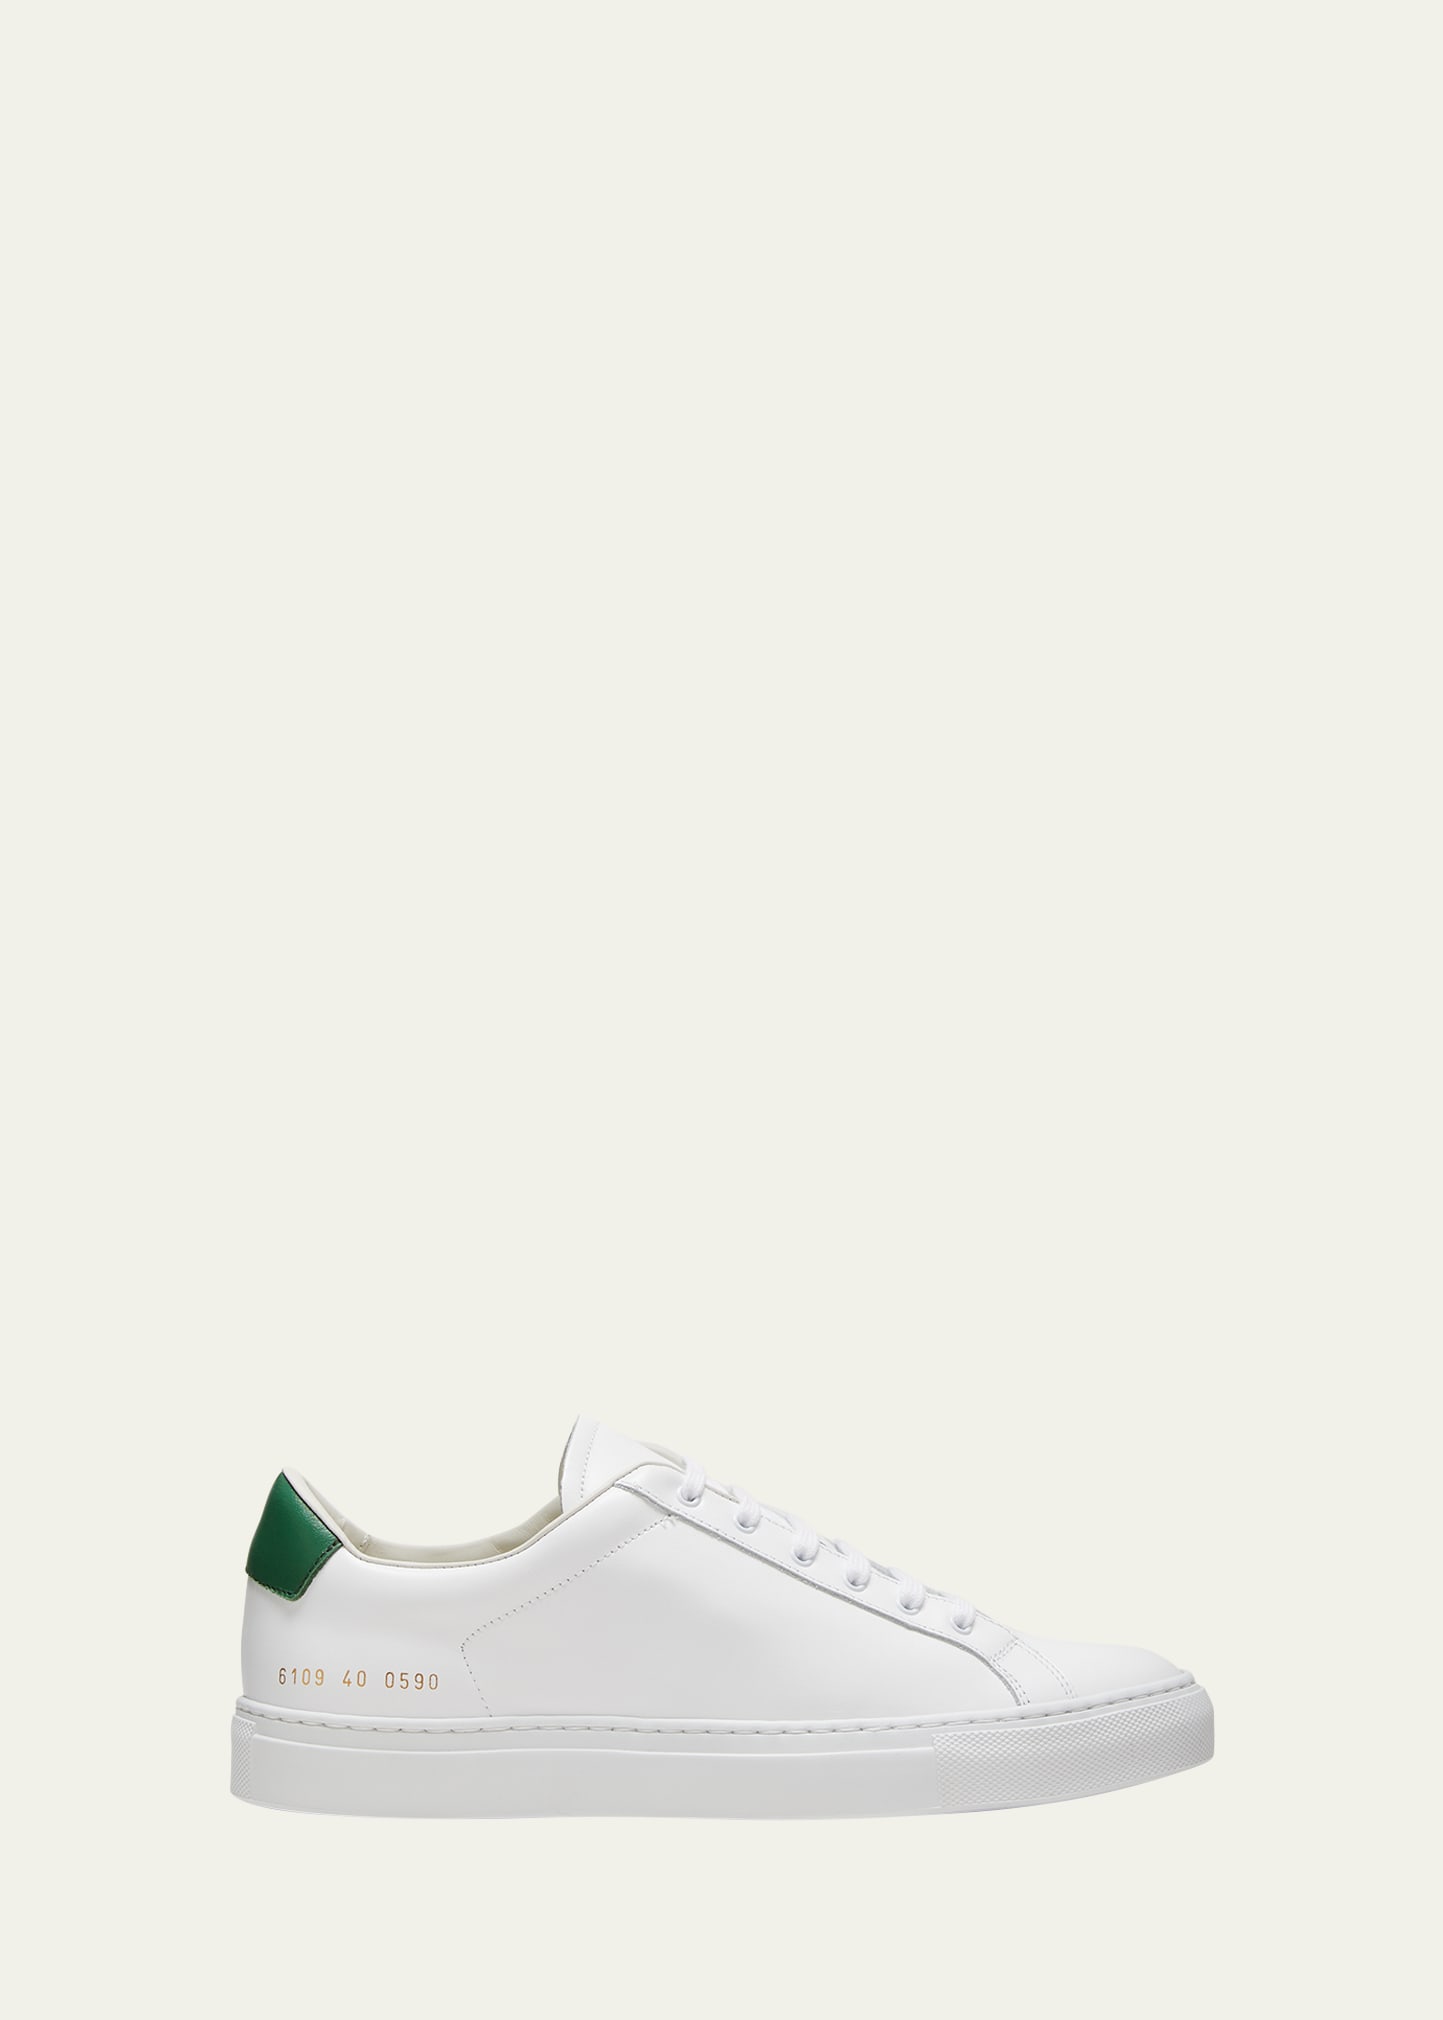 COMMON PROJECTS RETRO BICOLOR LEATHER LOW-TOP SNEAKERS